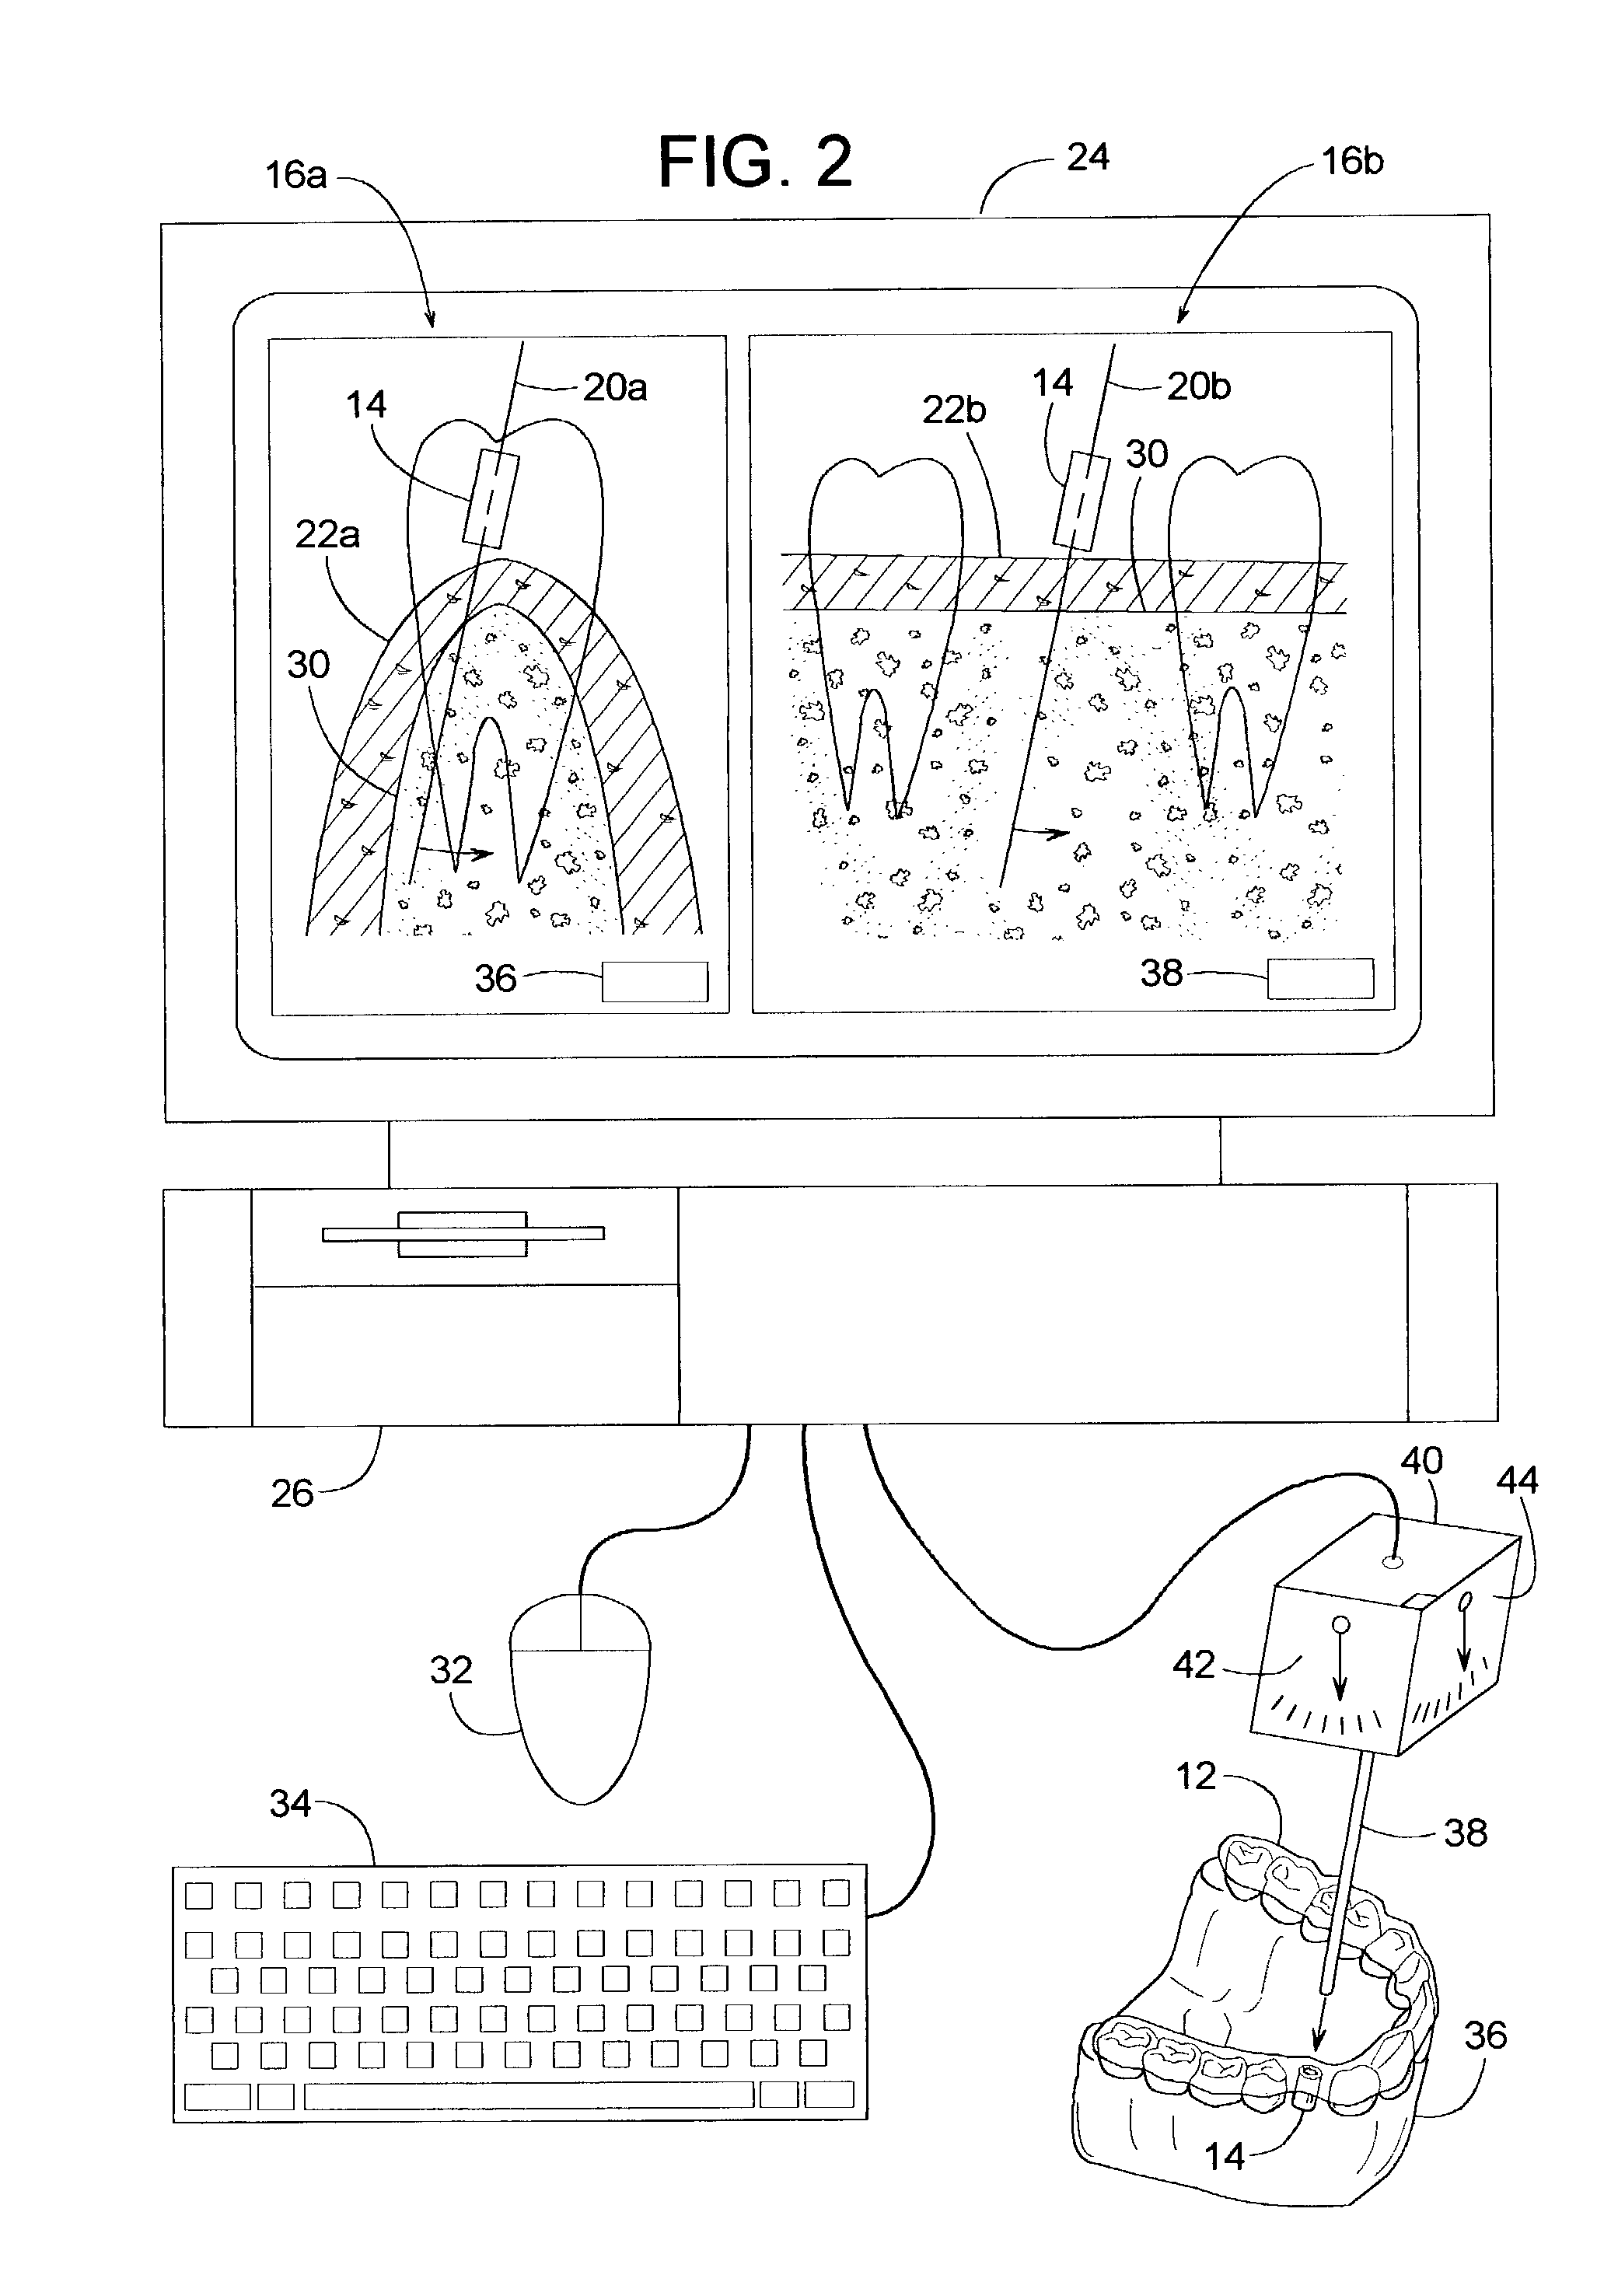 Method of adjusting a drill bushing for a dental implant